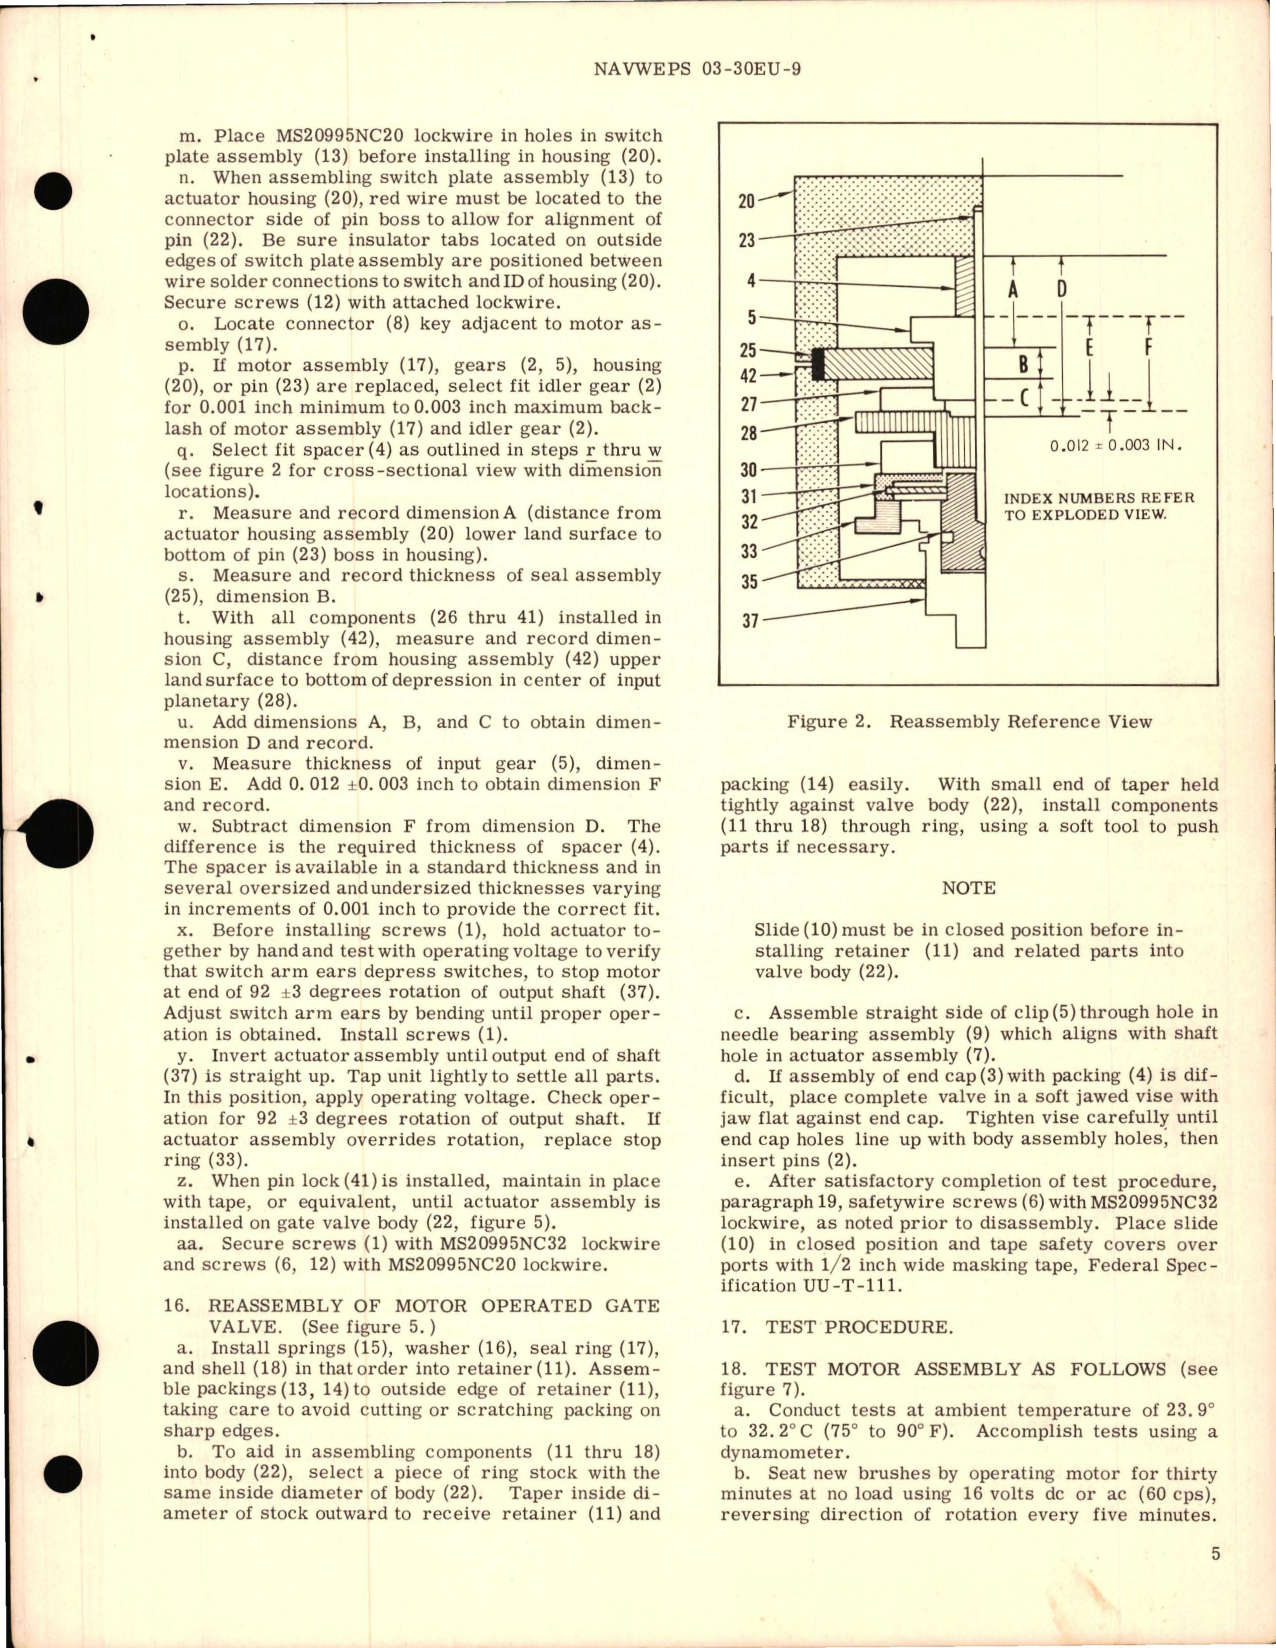 Sample page 7 from AirCorps Library document: Overhaul Instructions with Parts Breakdown for Motor Operated Gate Valve - Part AV16B1446C 